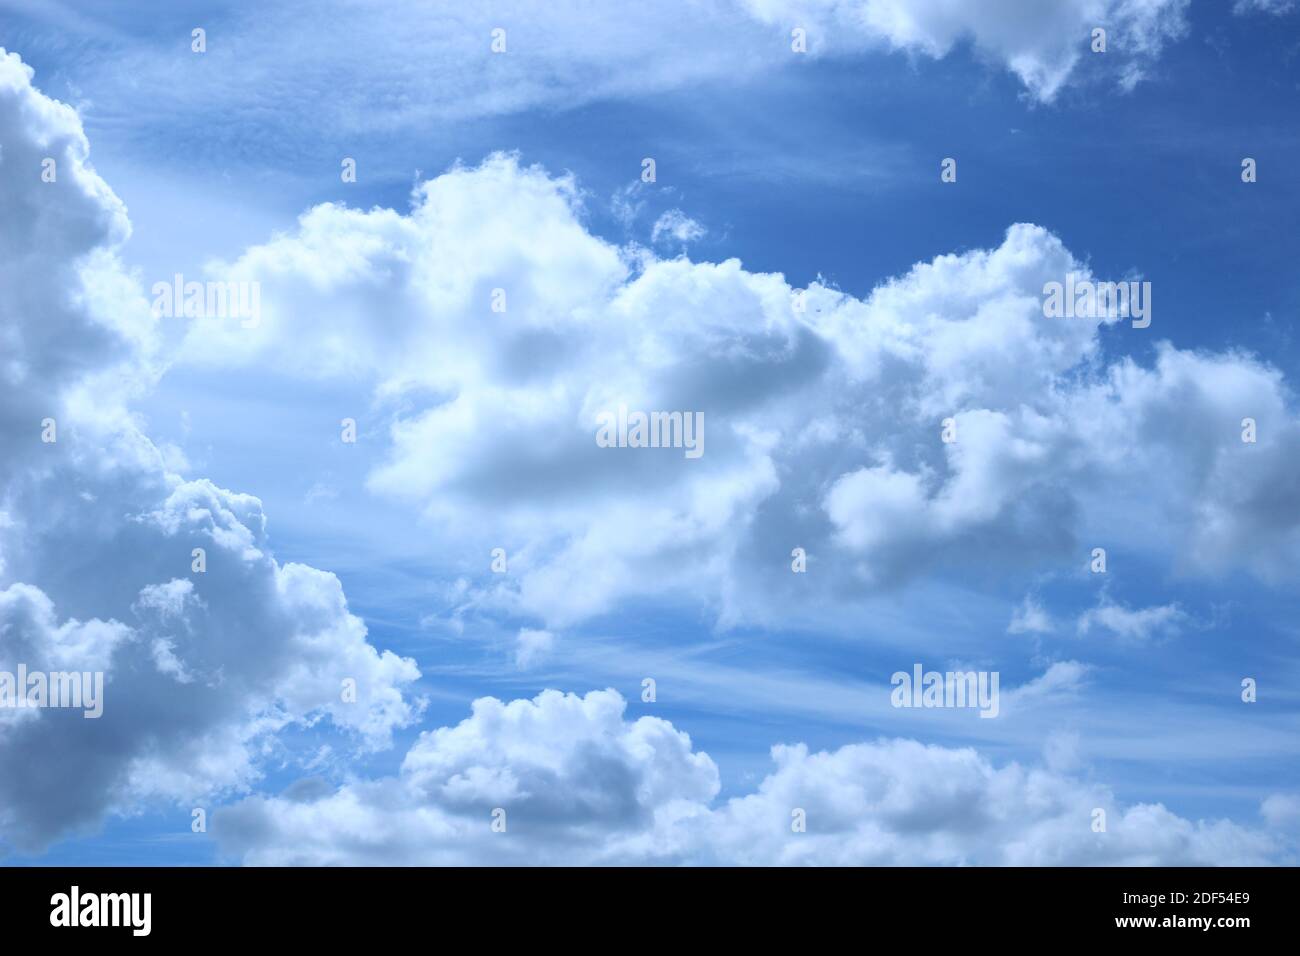 Clear blue sky with white fluffy clouds Stock Photo